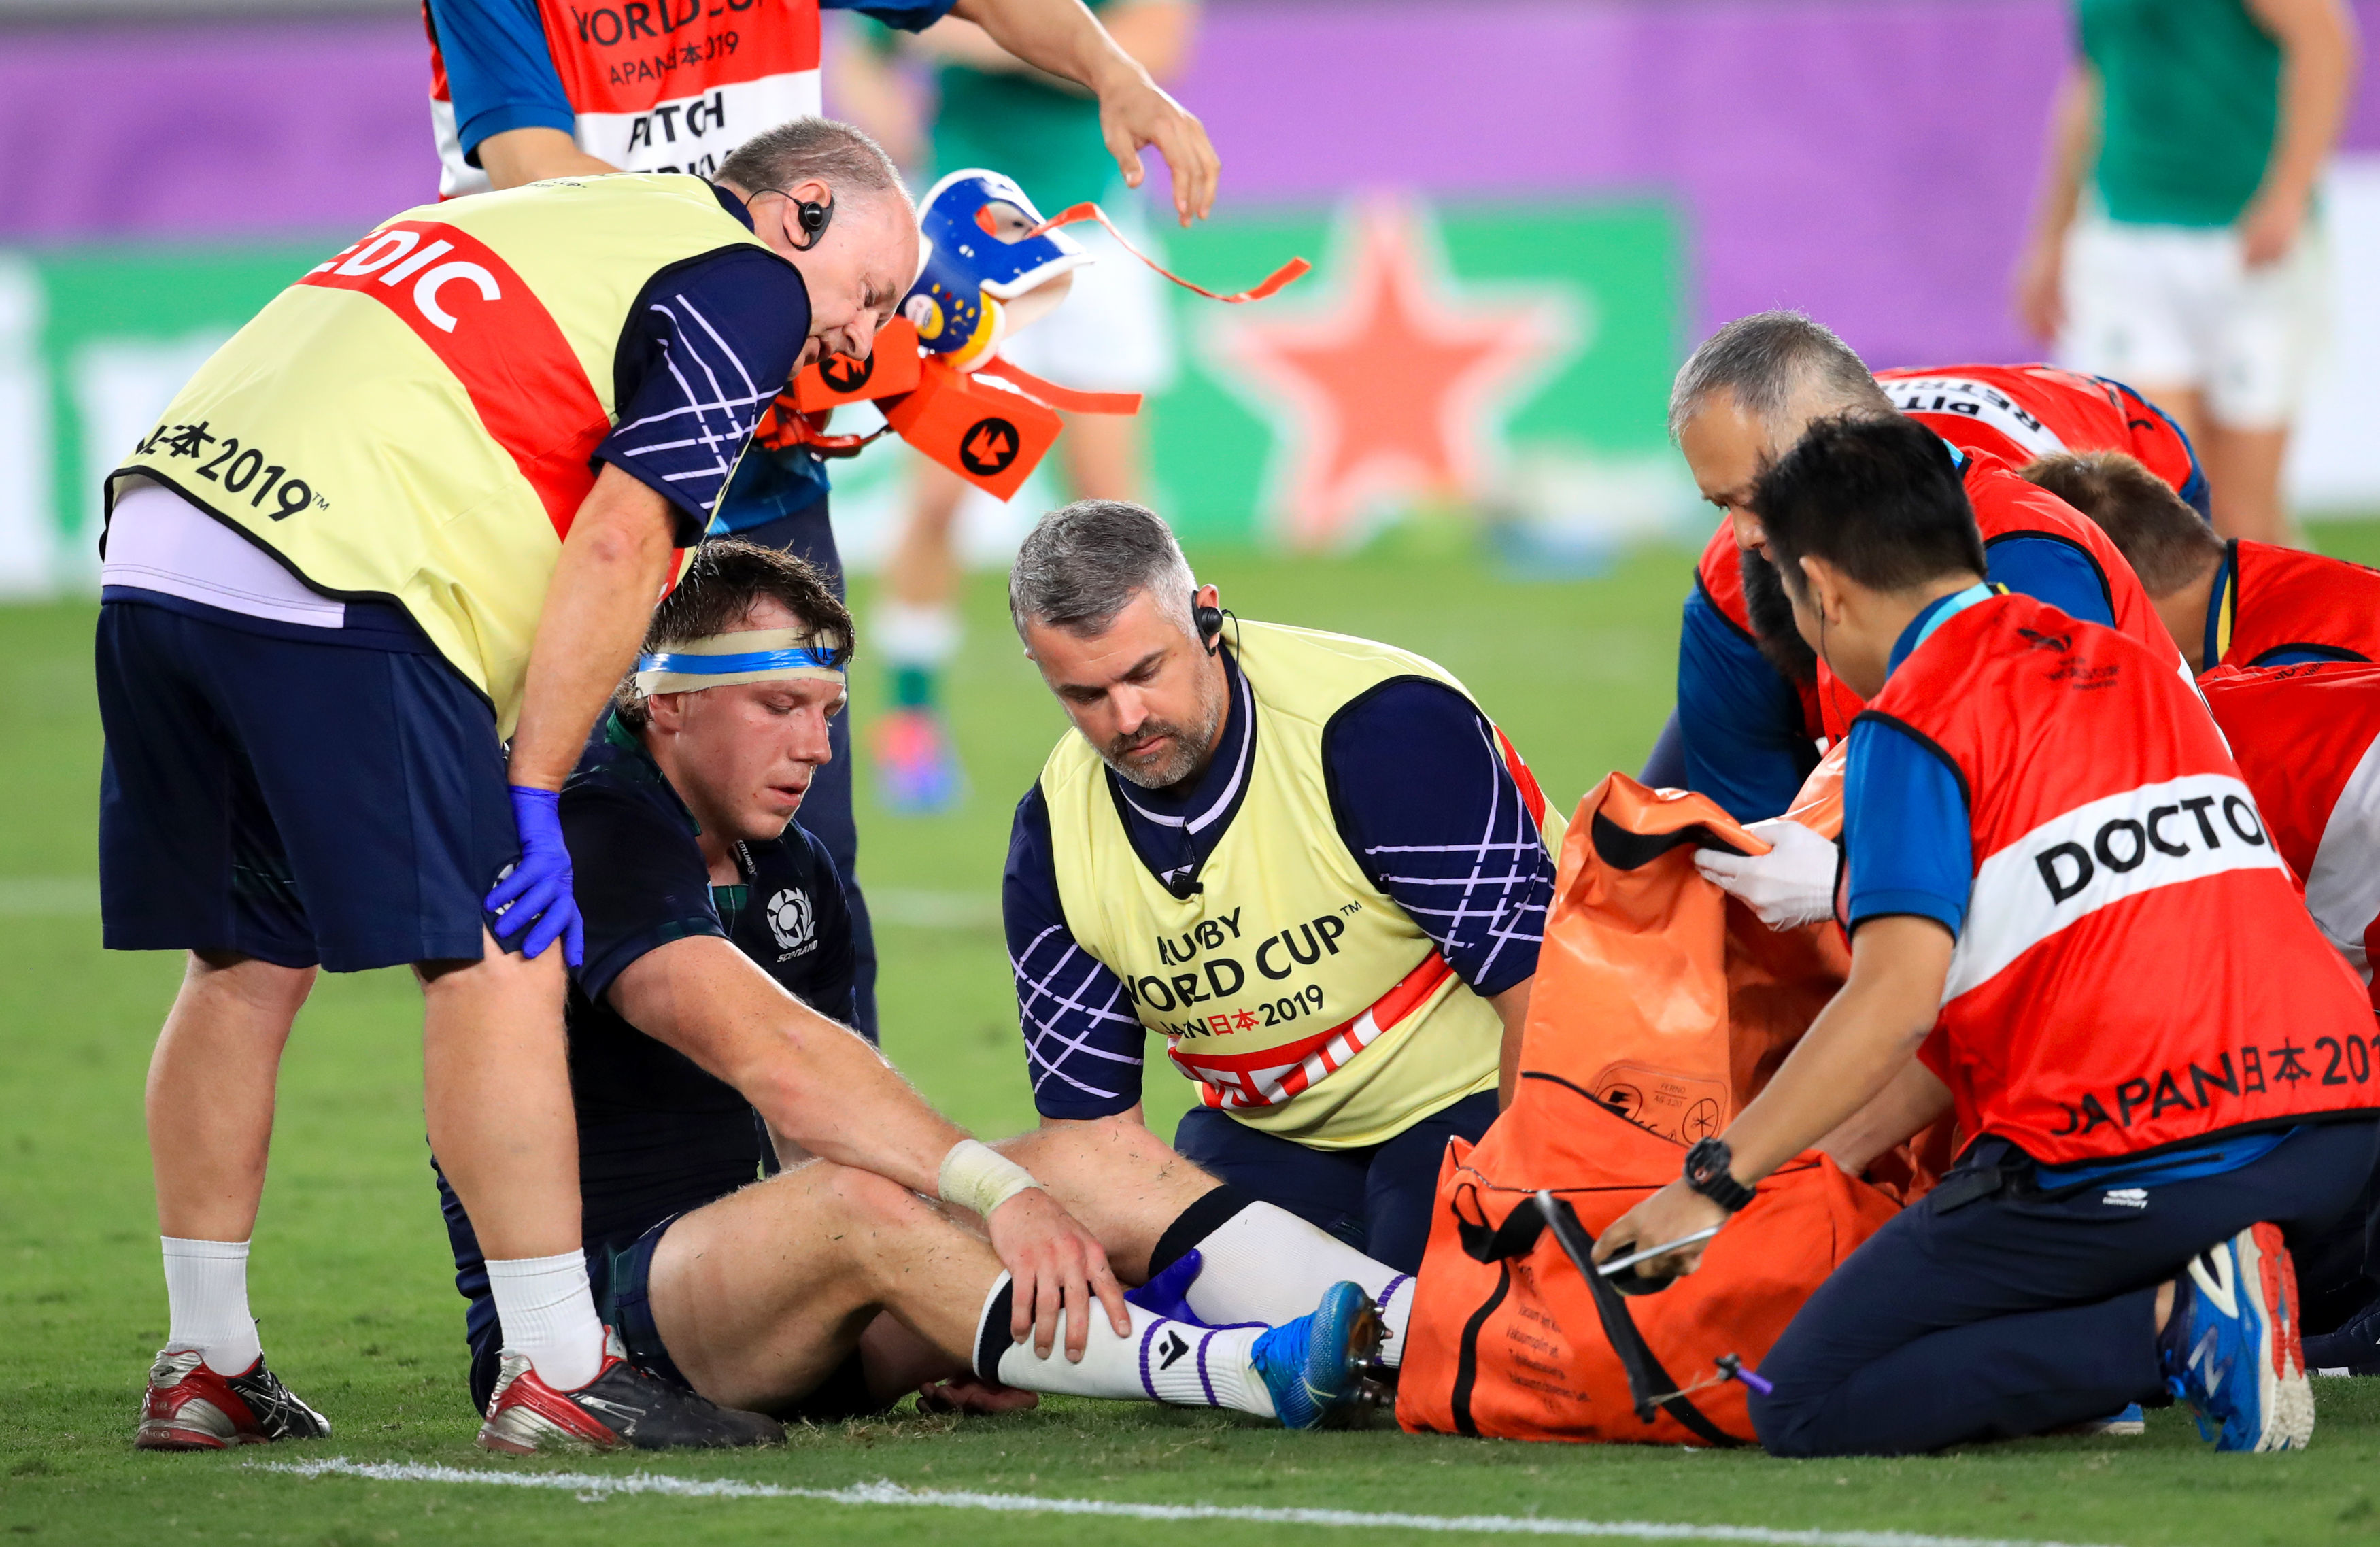 Scotland's Hamish Watson receives medical attention during the 2019 Rugby World Cup Pool A match.